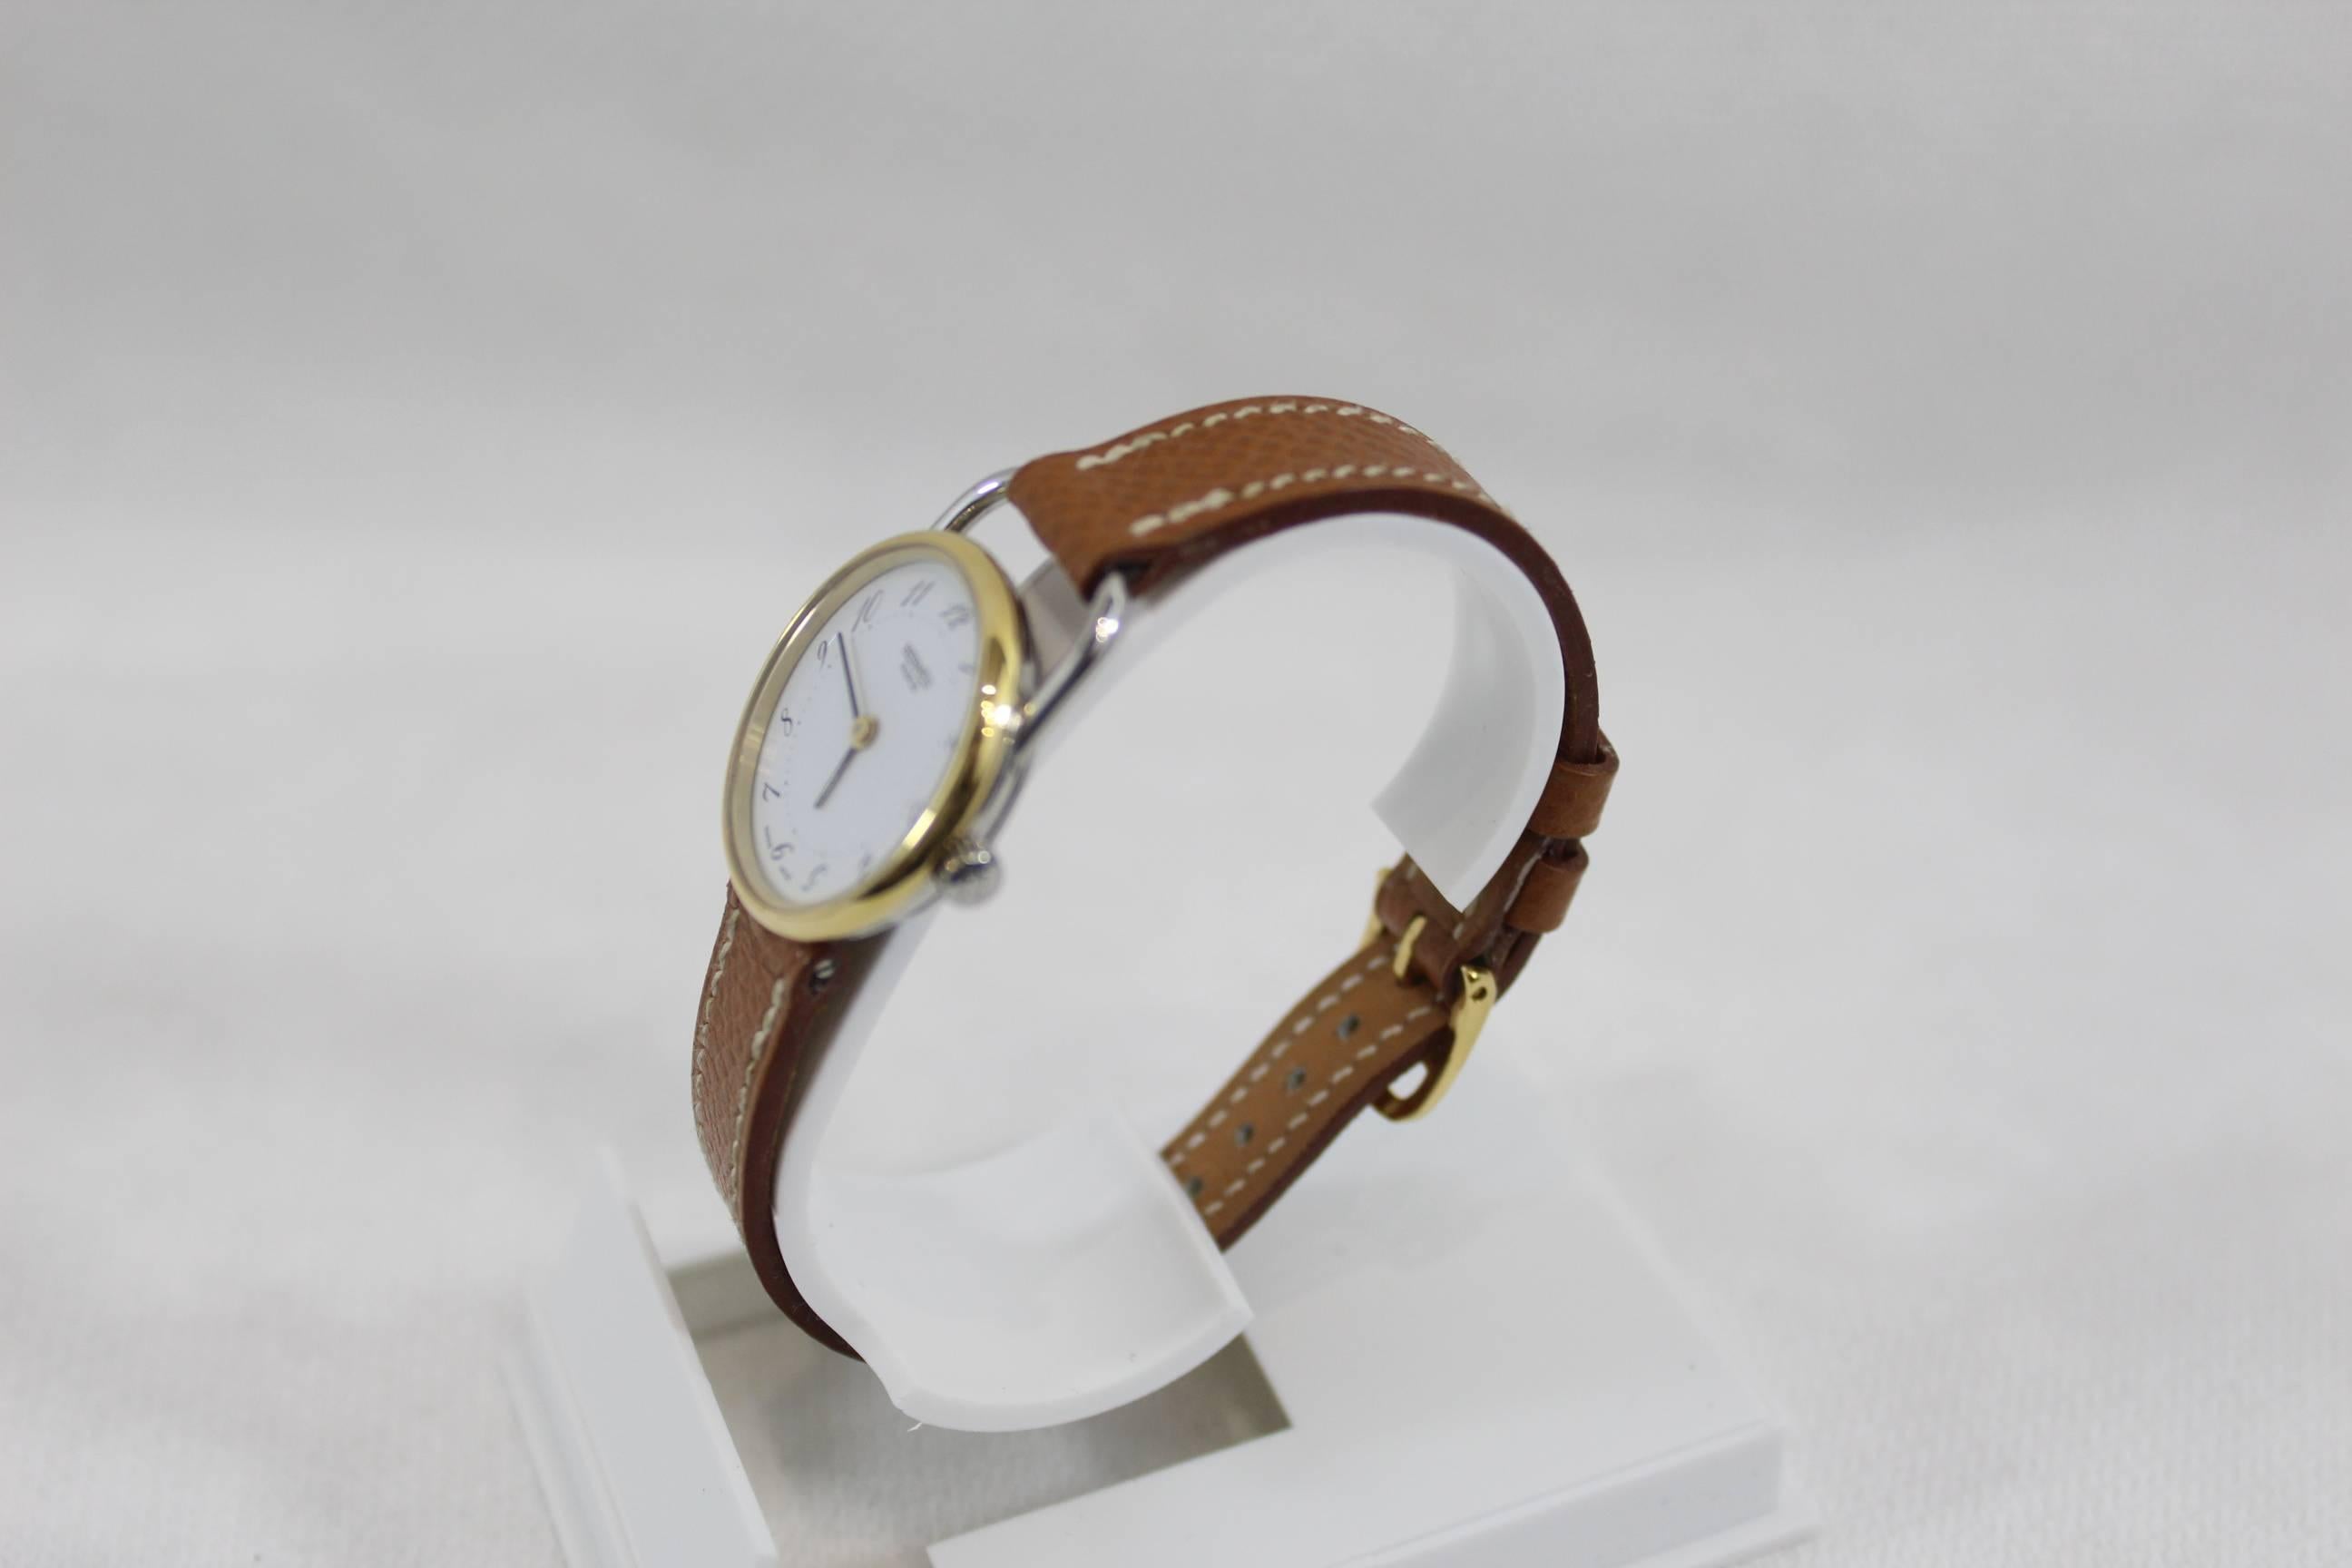 Gorgeous Hermes Arceau Gold plated and Steel watch.

brown leather strap in Epson Leather.

excellent condition. It has been revised by hermes in 2015 so it is still under warranty till june 2017.
